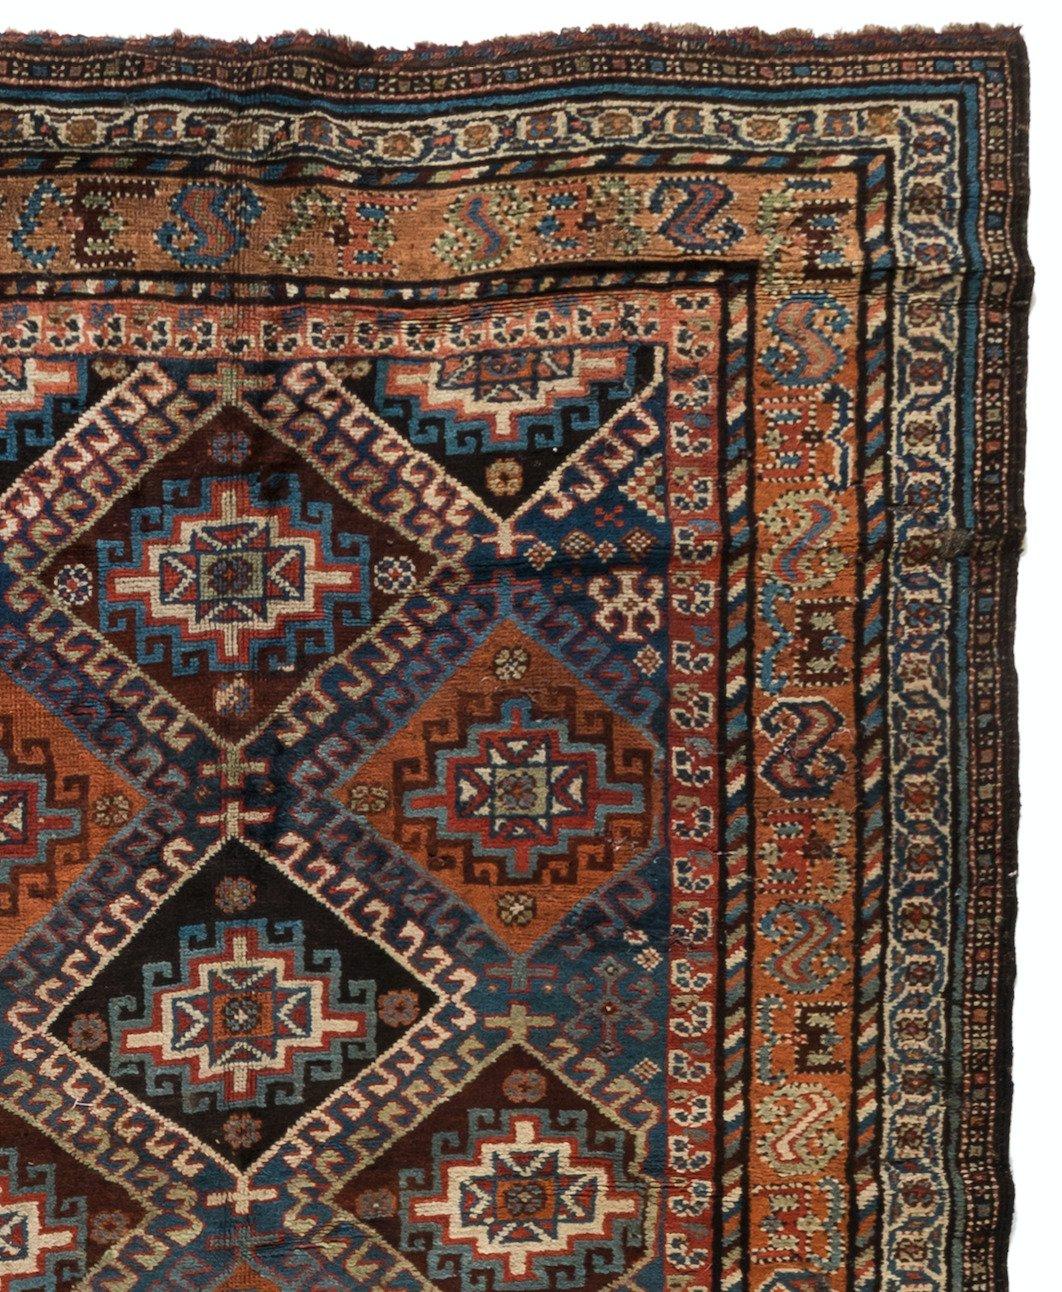 Hand-Knotted Antique Green Blue Tribal Geometric Persian Kurd Area Rug, circa 1920s-1930s For Sale